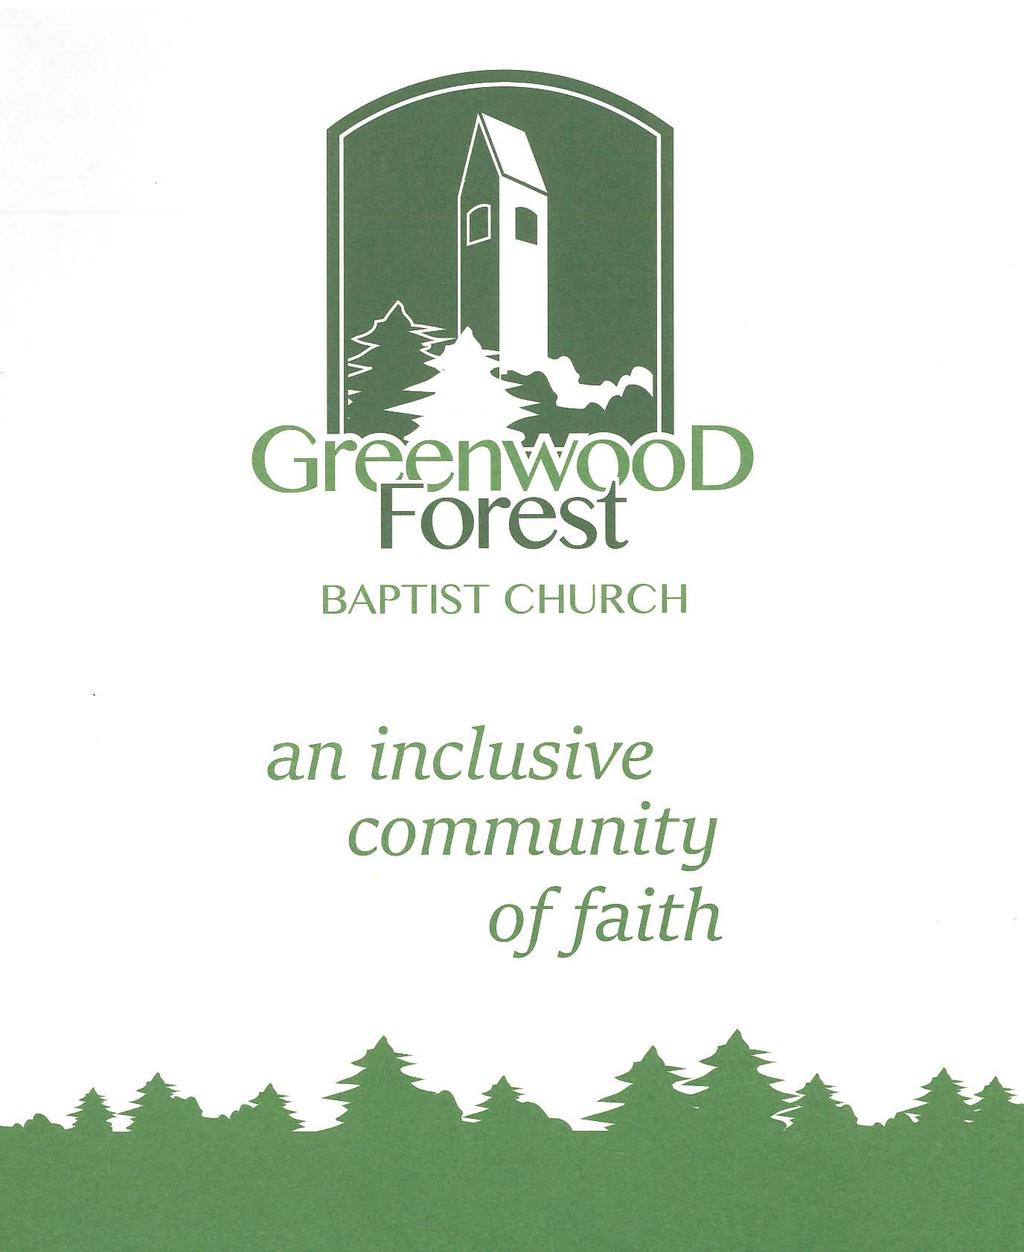 GREENWOOD FOREST BAPTIST CHURCH The Worship of God The Third Sunday of Lent March 24, 2019 Chiming of the Hour Processional Hymn 33 Welcome to Worship Guide Me, O Thou Great Jehovah Rev.